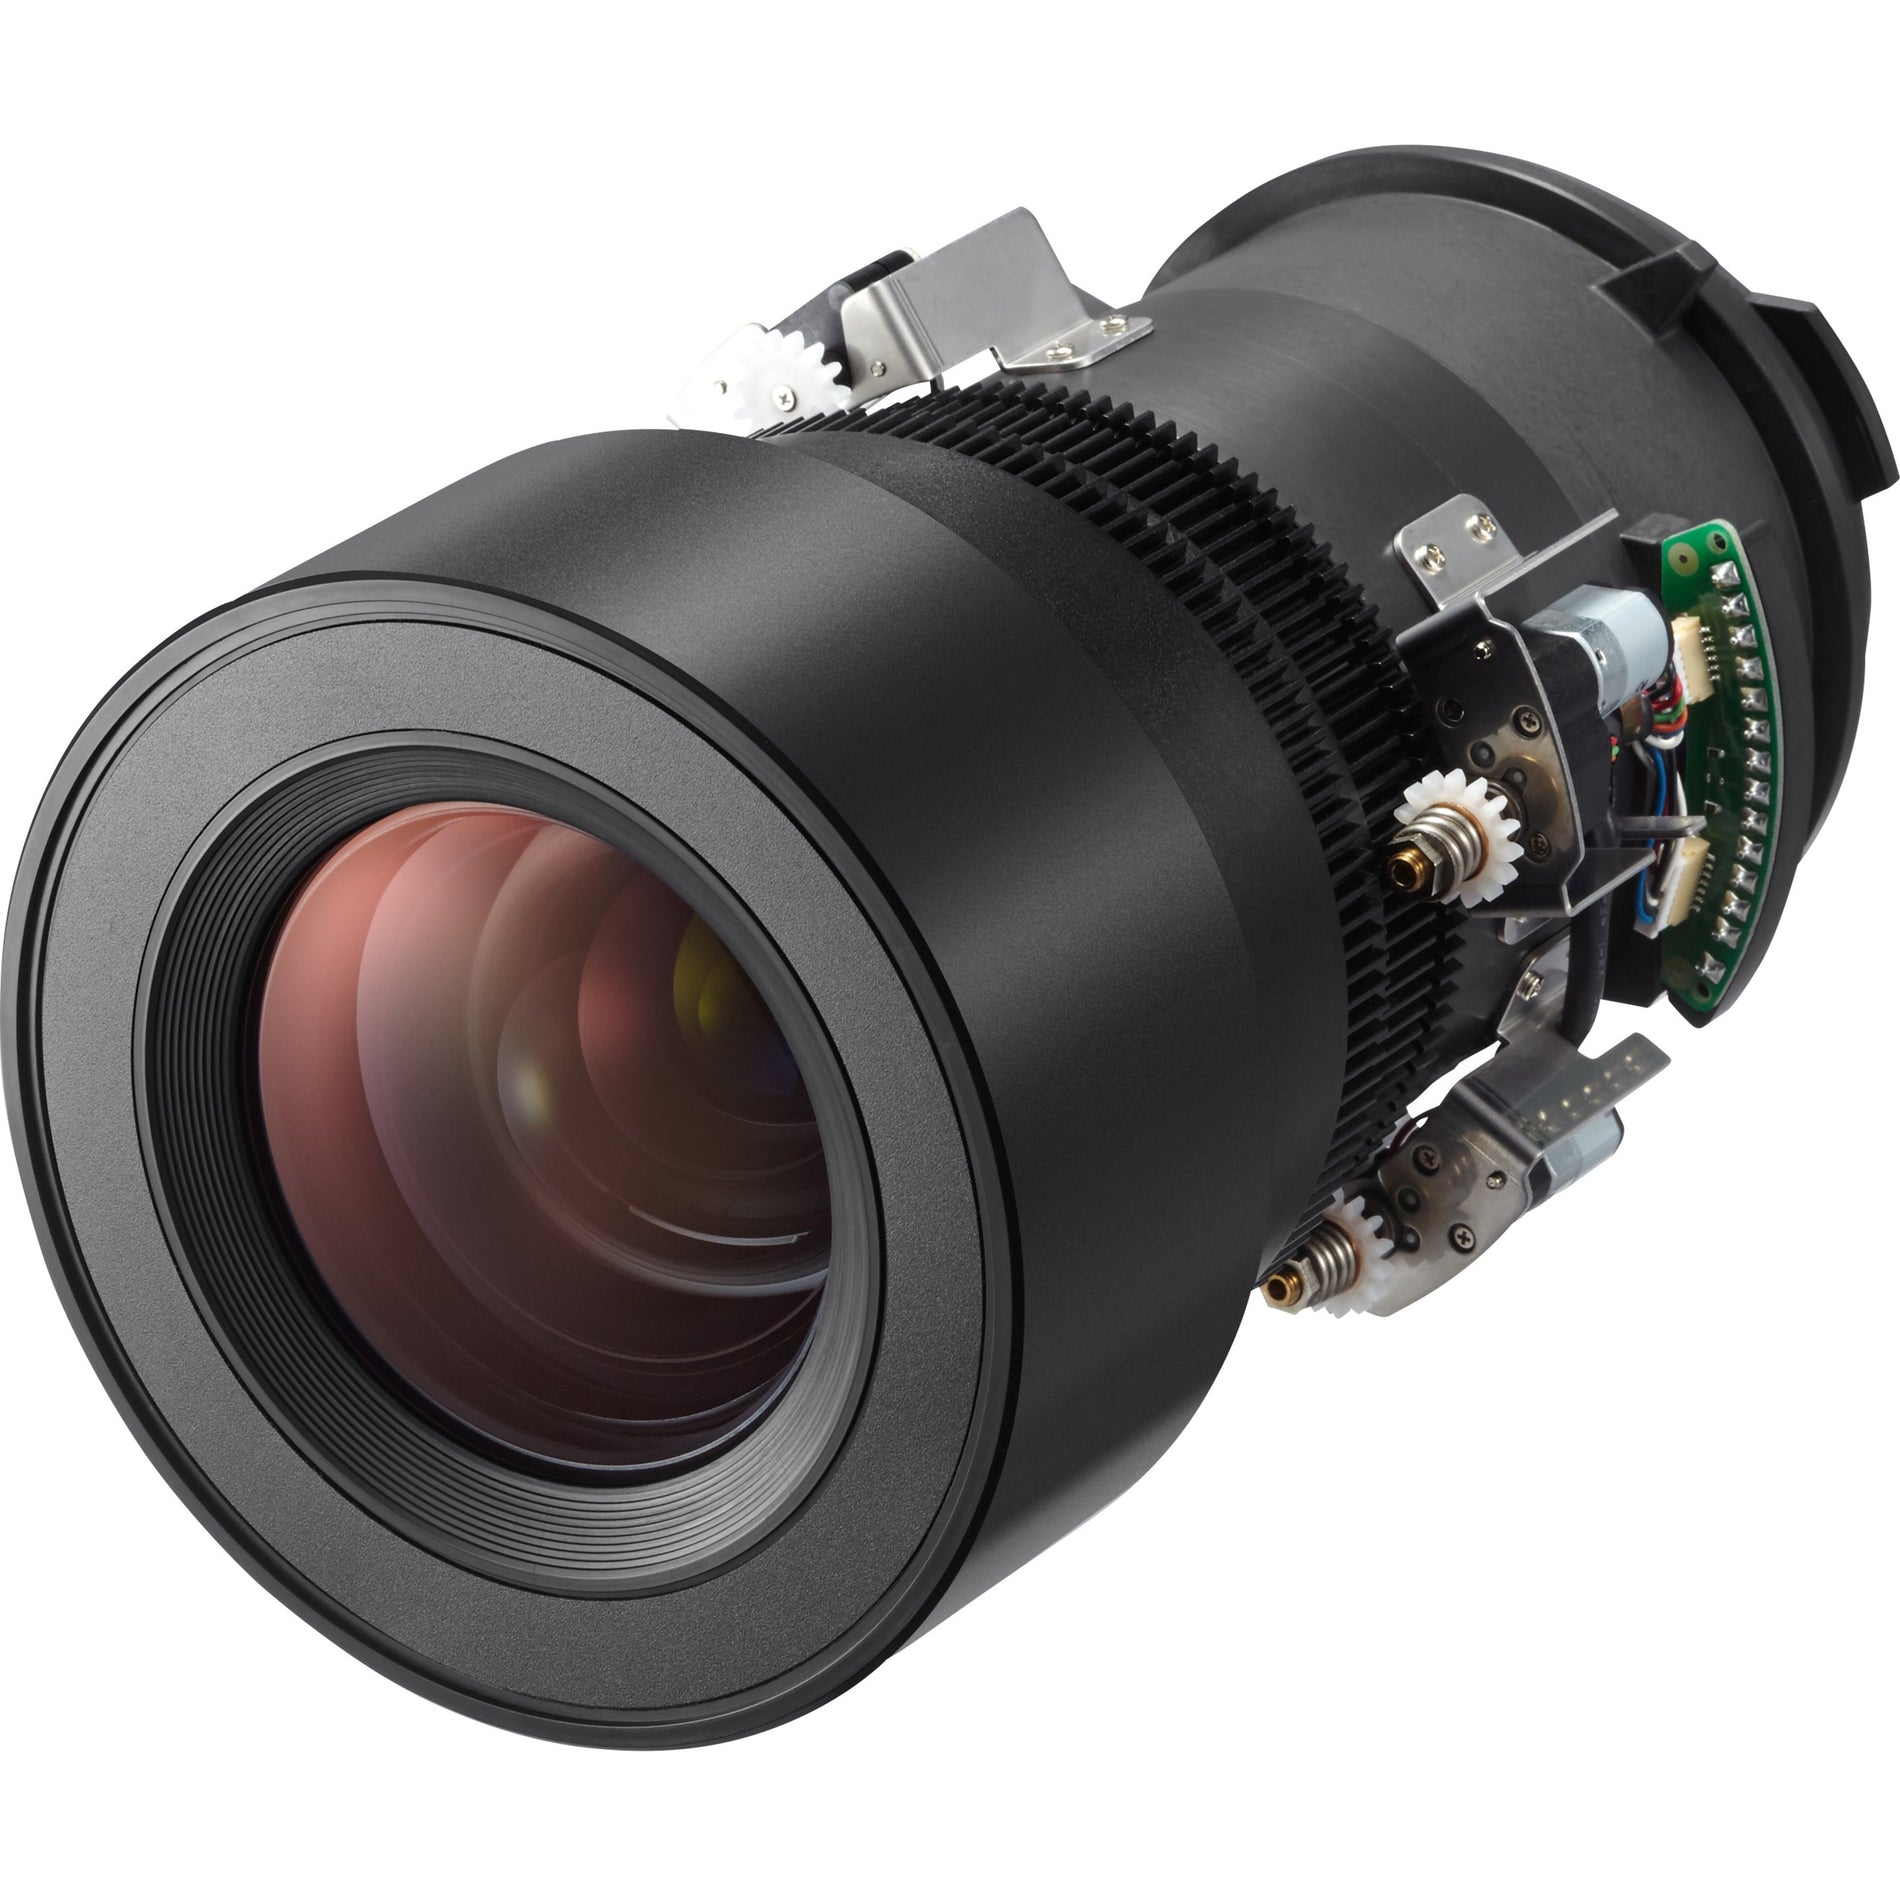 NEC Display NP41ZL Middle Zoom Lens for The NEC PA 3 Series, 2.3x Optical Zoom